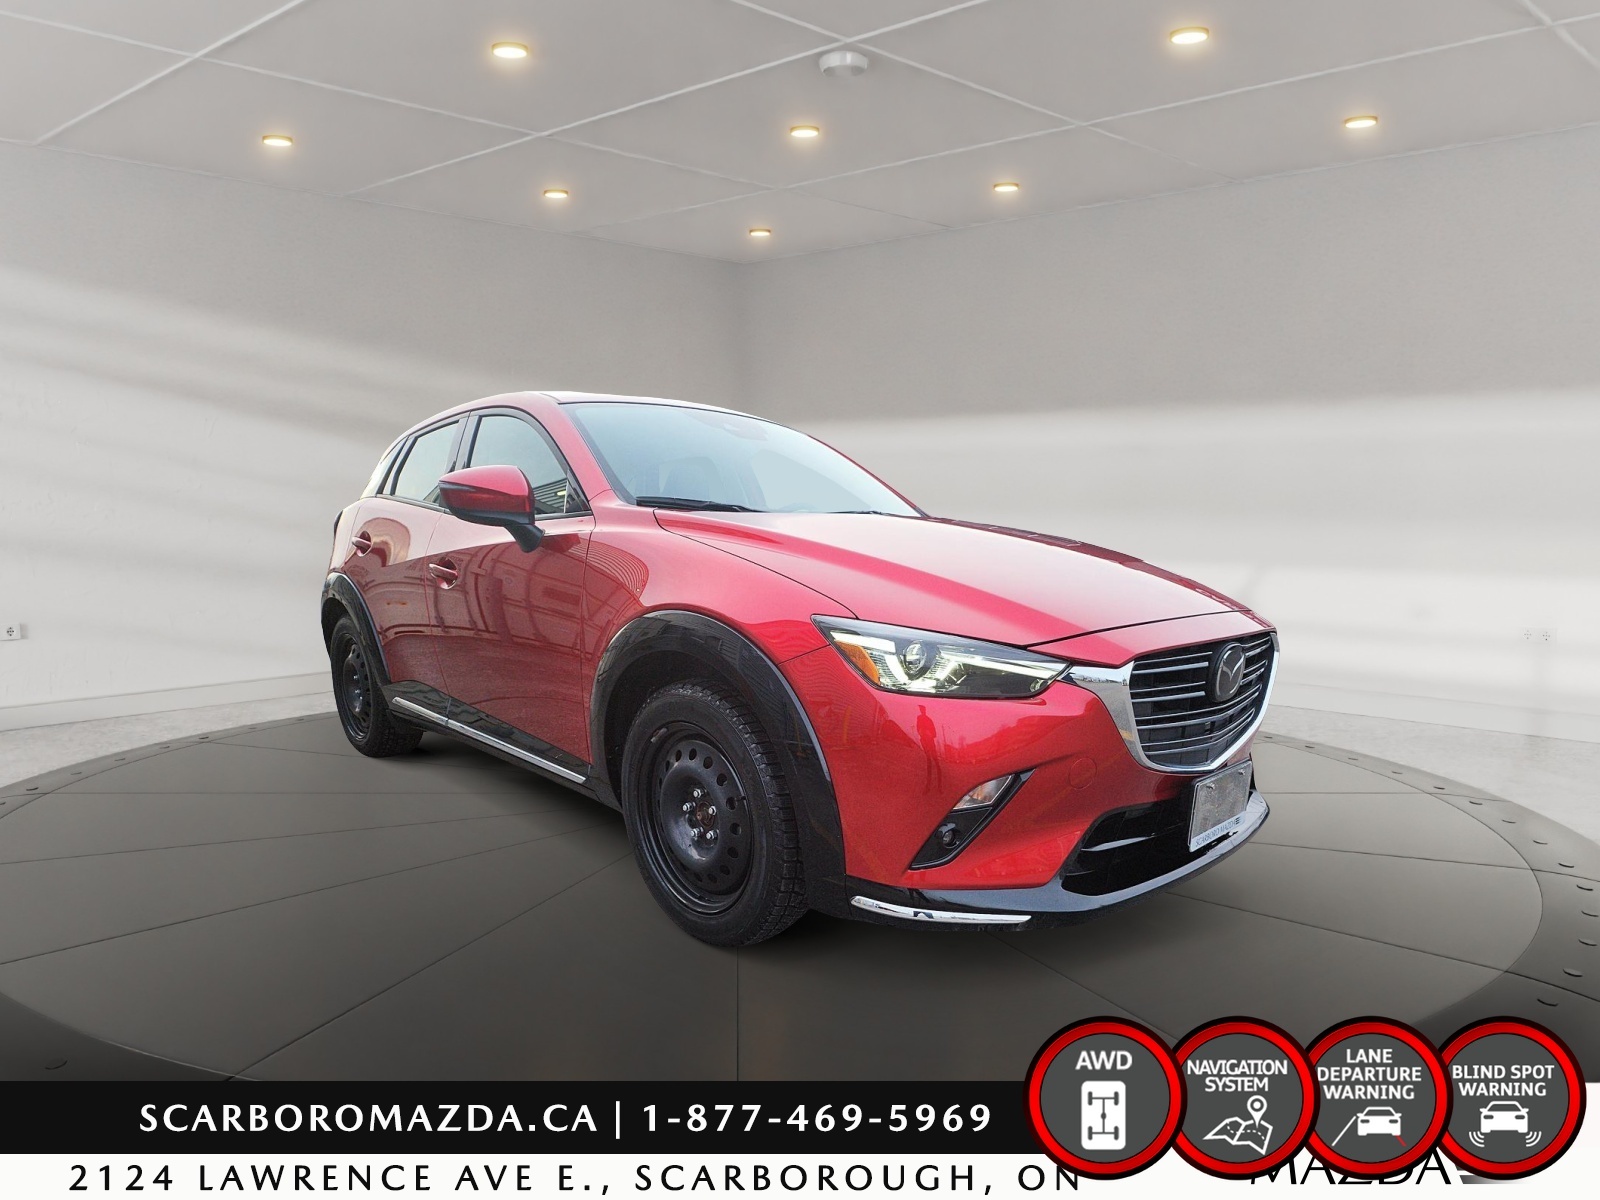 2022 Mazda CX-3 GT|AWD|2 SET TIRES|SUNROOF|NAV|LEATHER HEATED SEAT